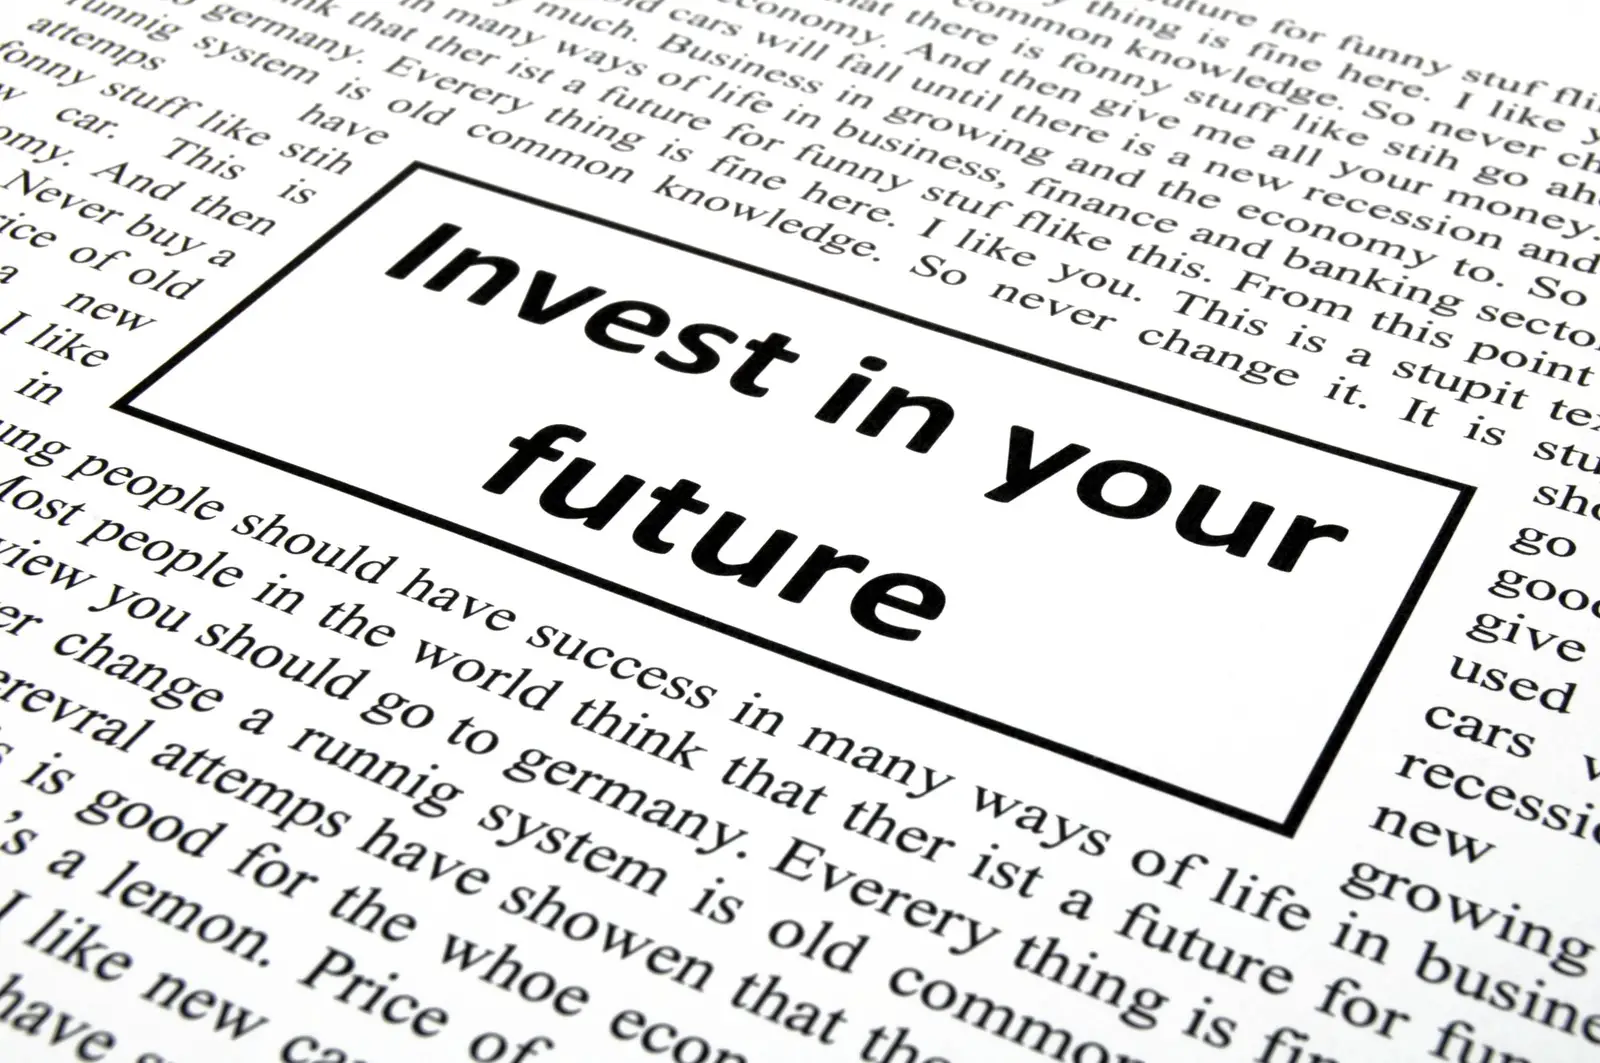 Invest in your future written in a box in the middle of the  newspaper